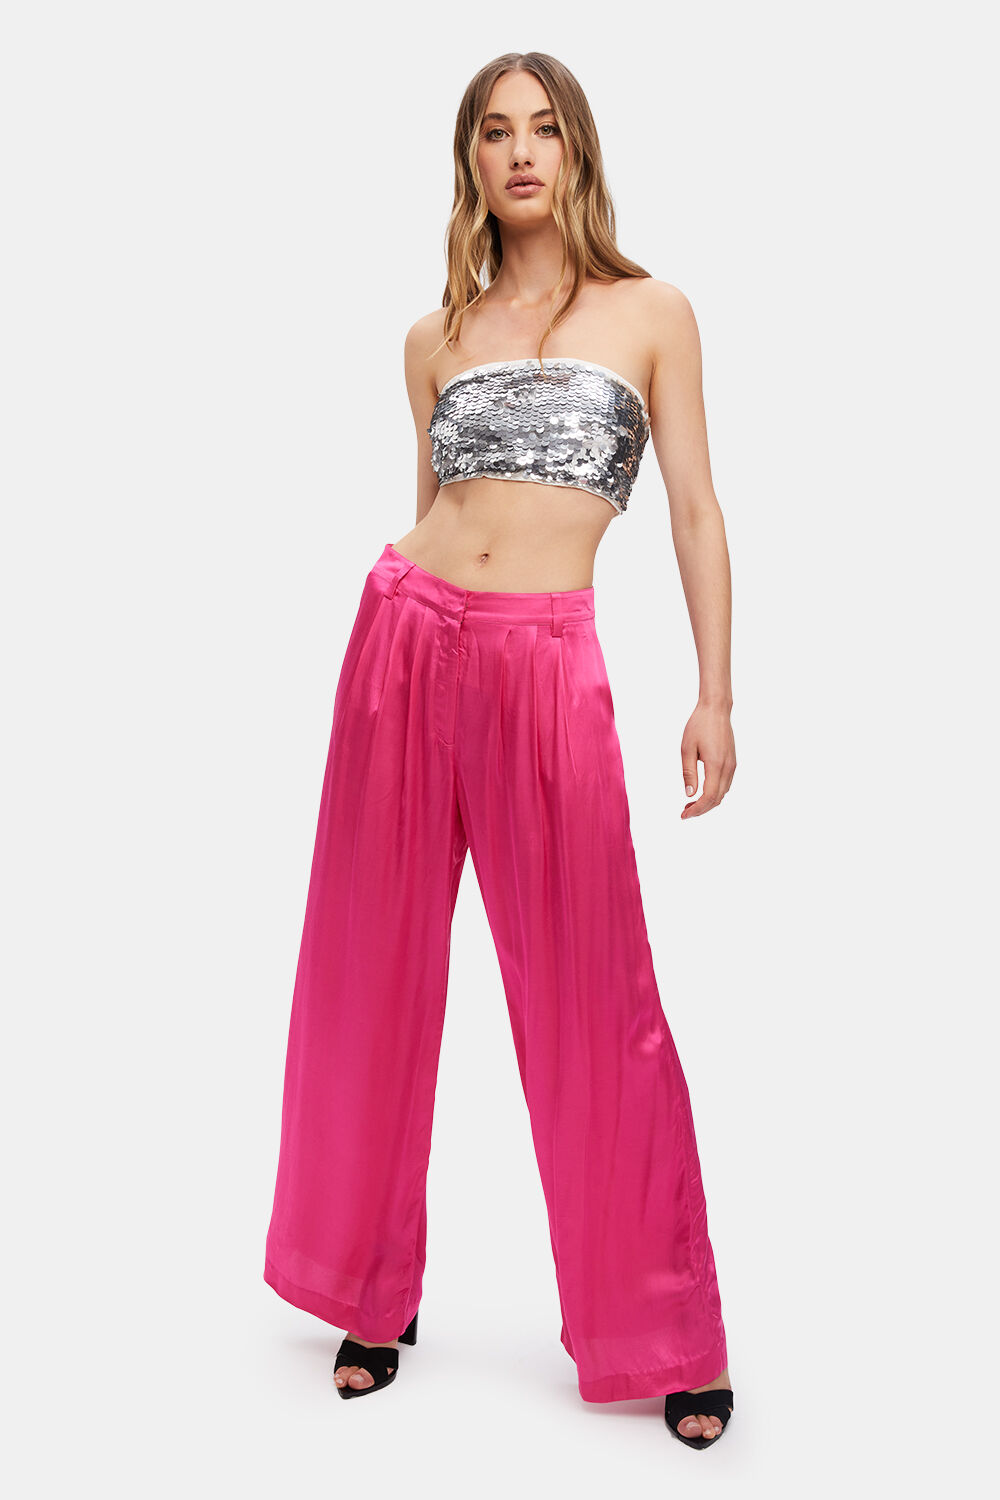 LENA PIN TUCK PANT in colour HOT PINK